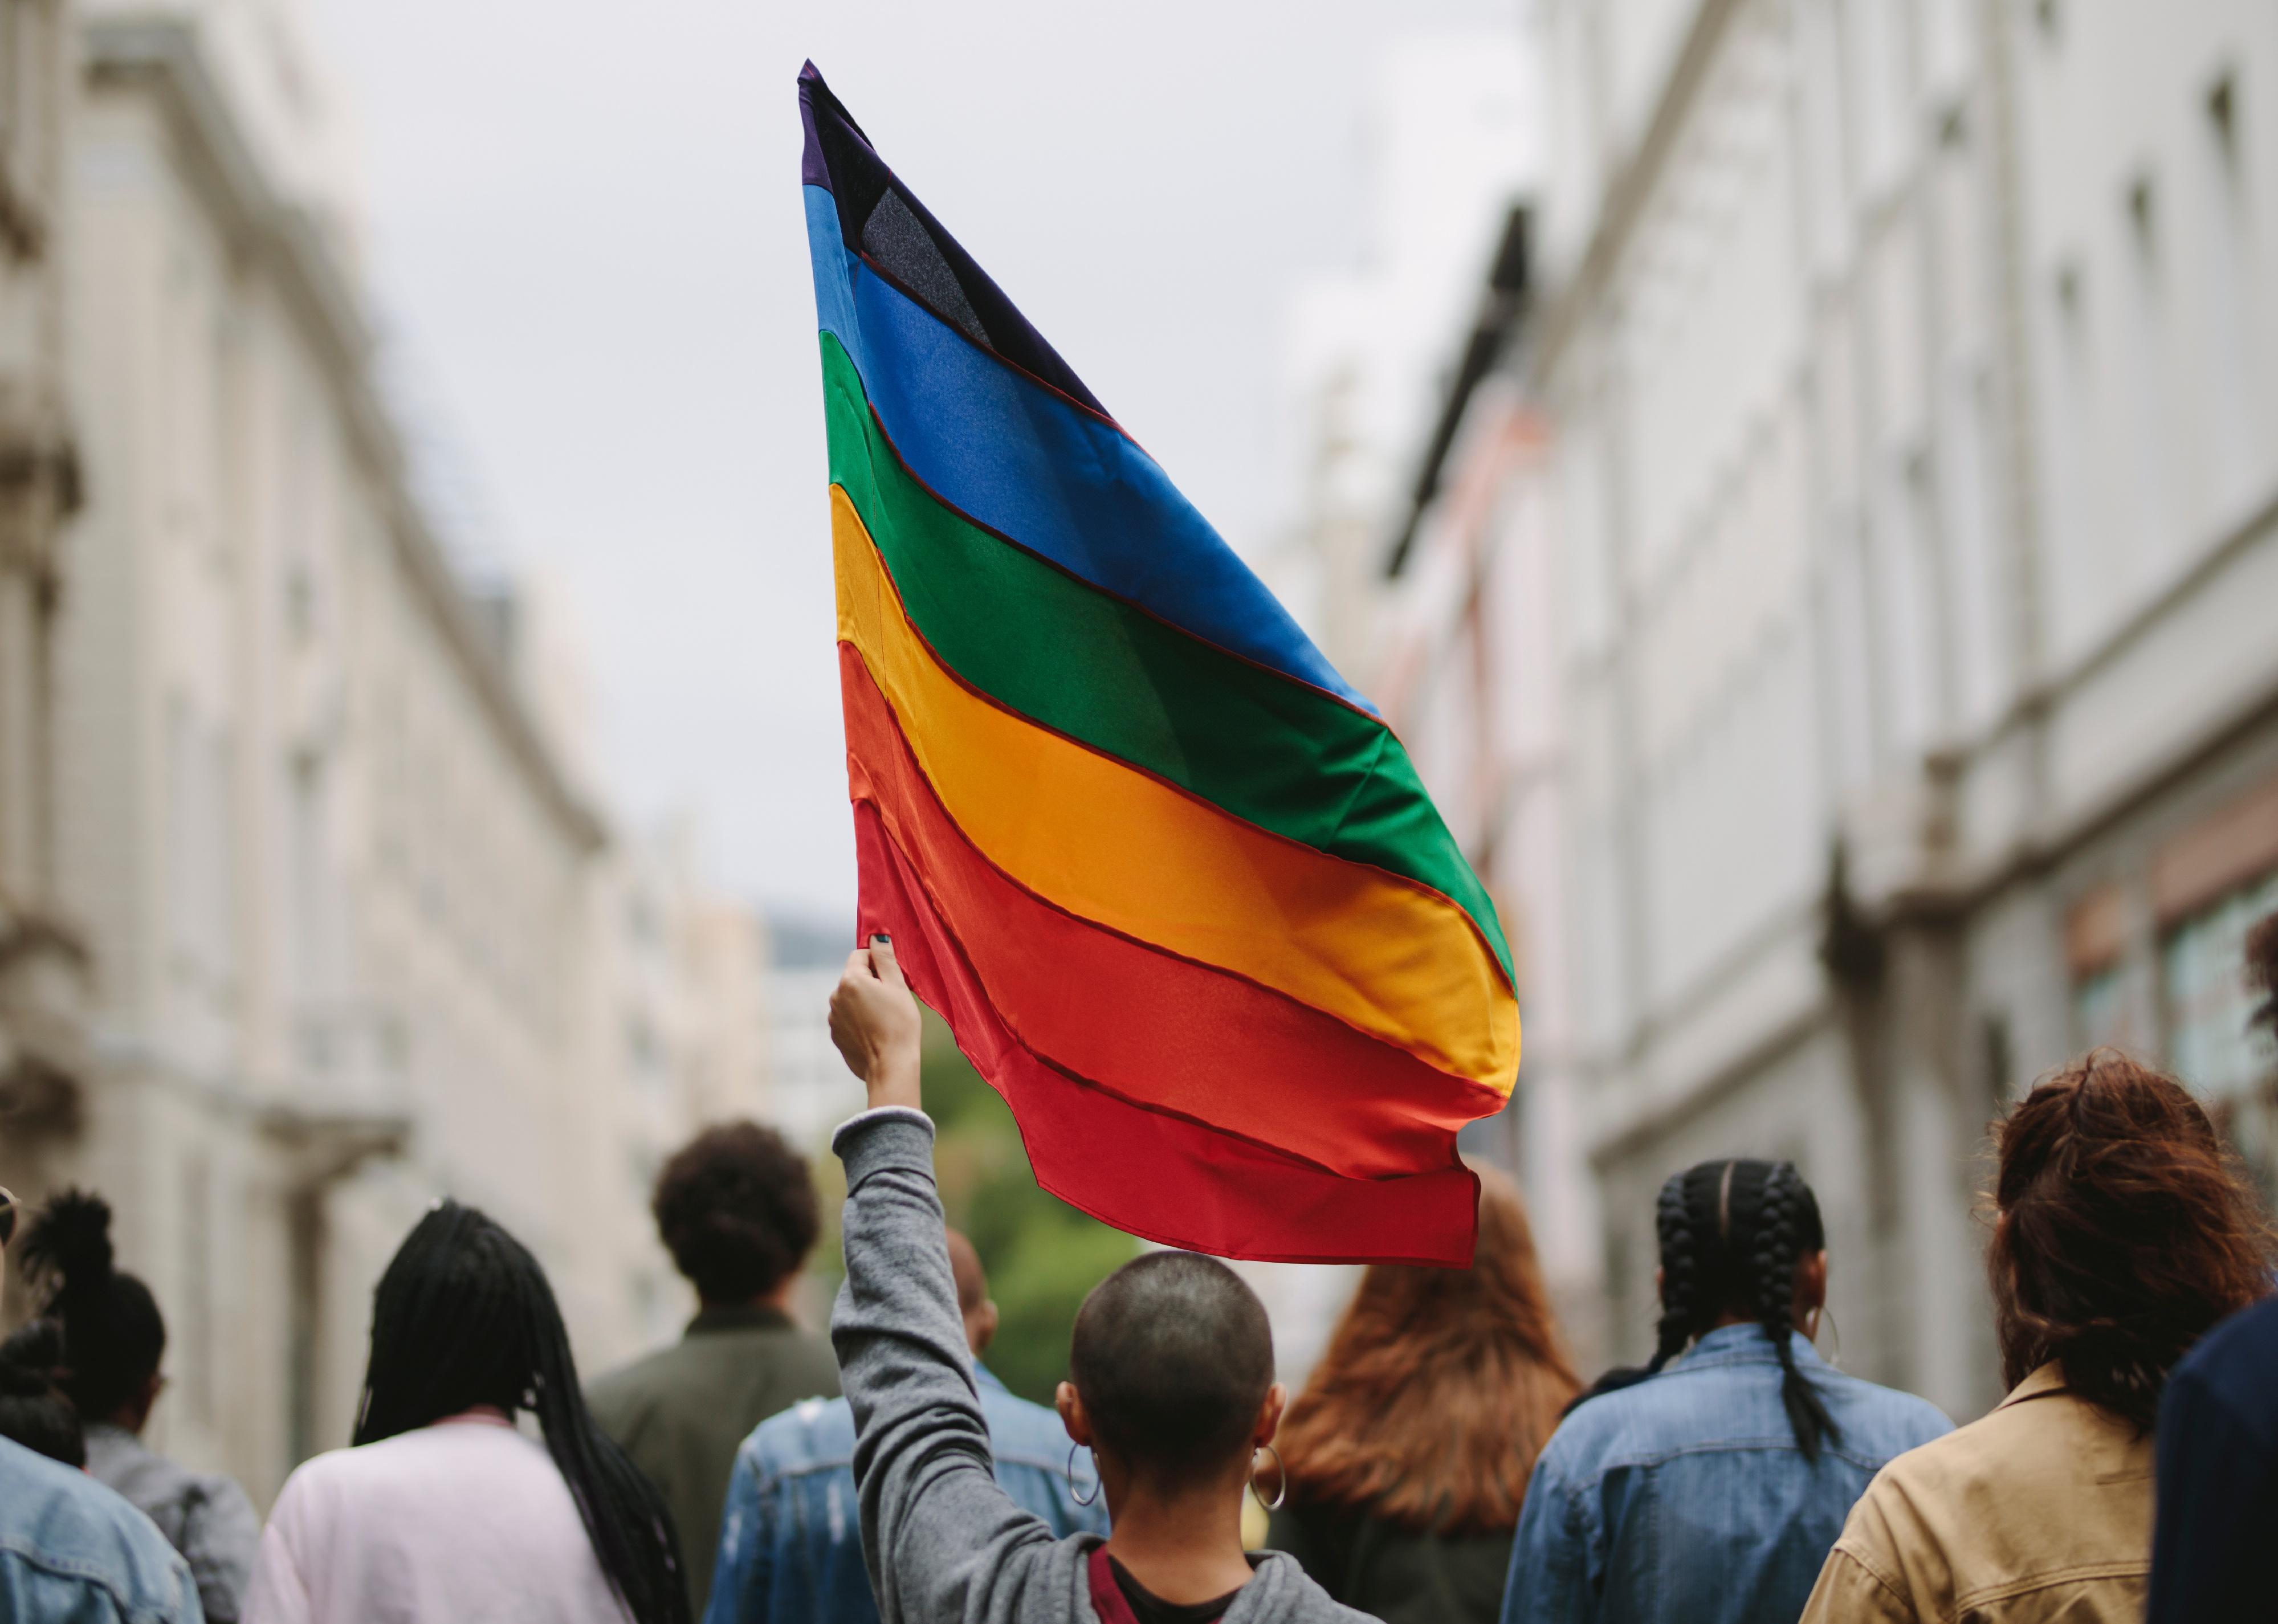 Group of people on a city street with rainbow flag.